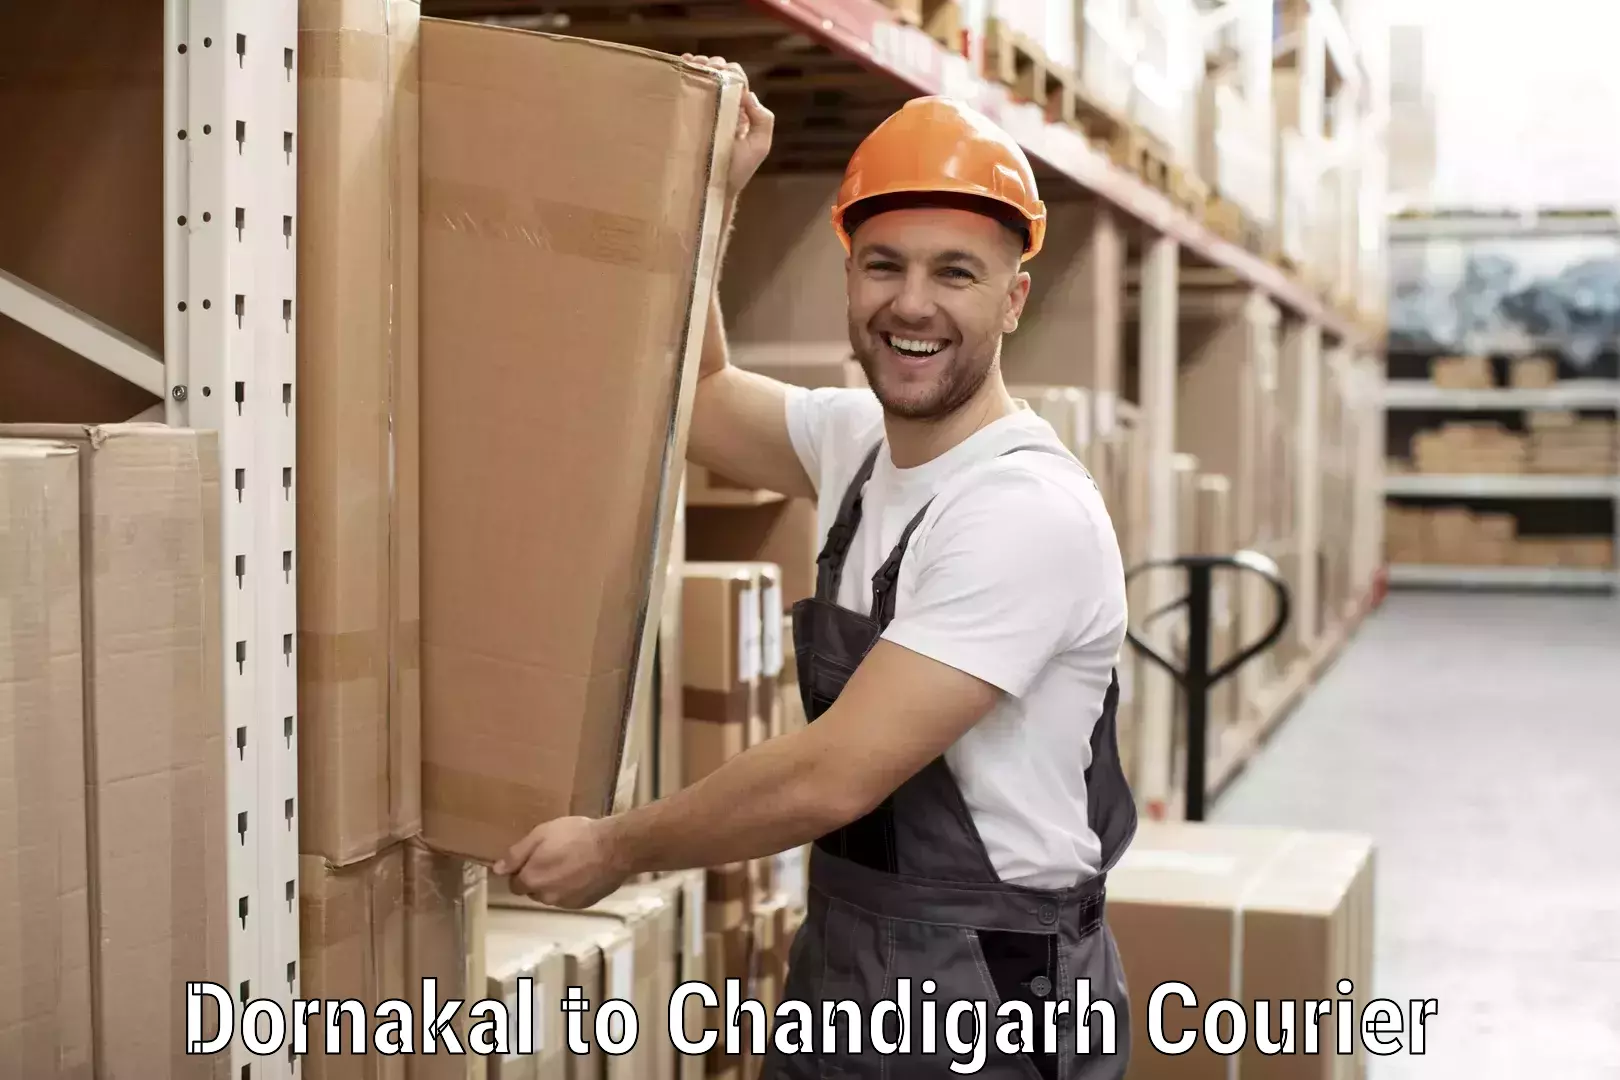 Flexible delivery schedules Dornakal to Chandigarh